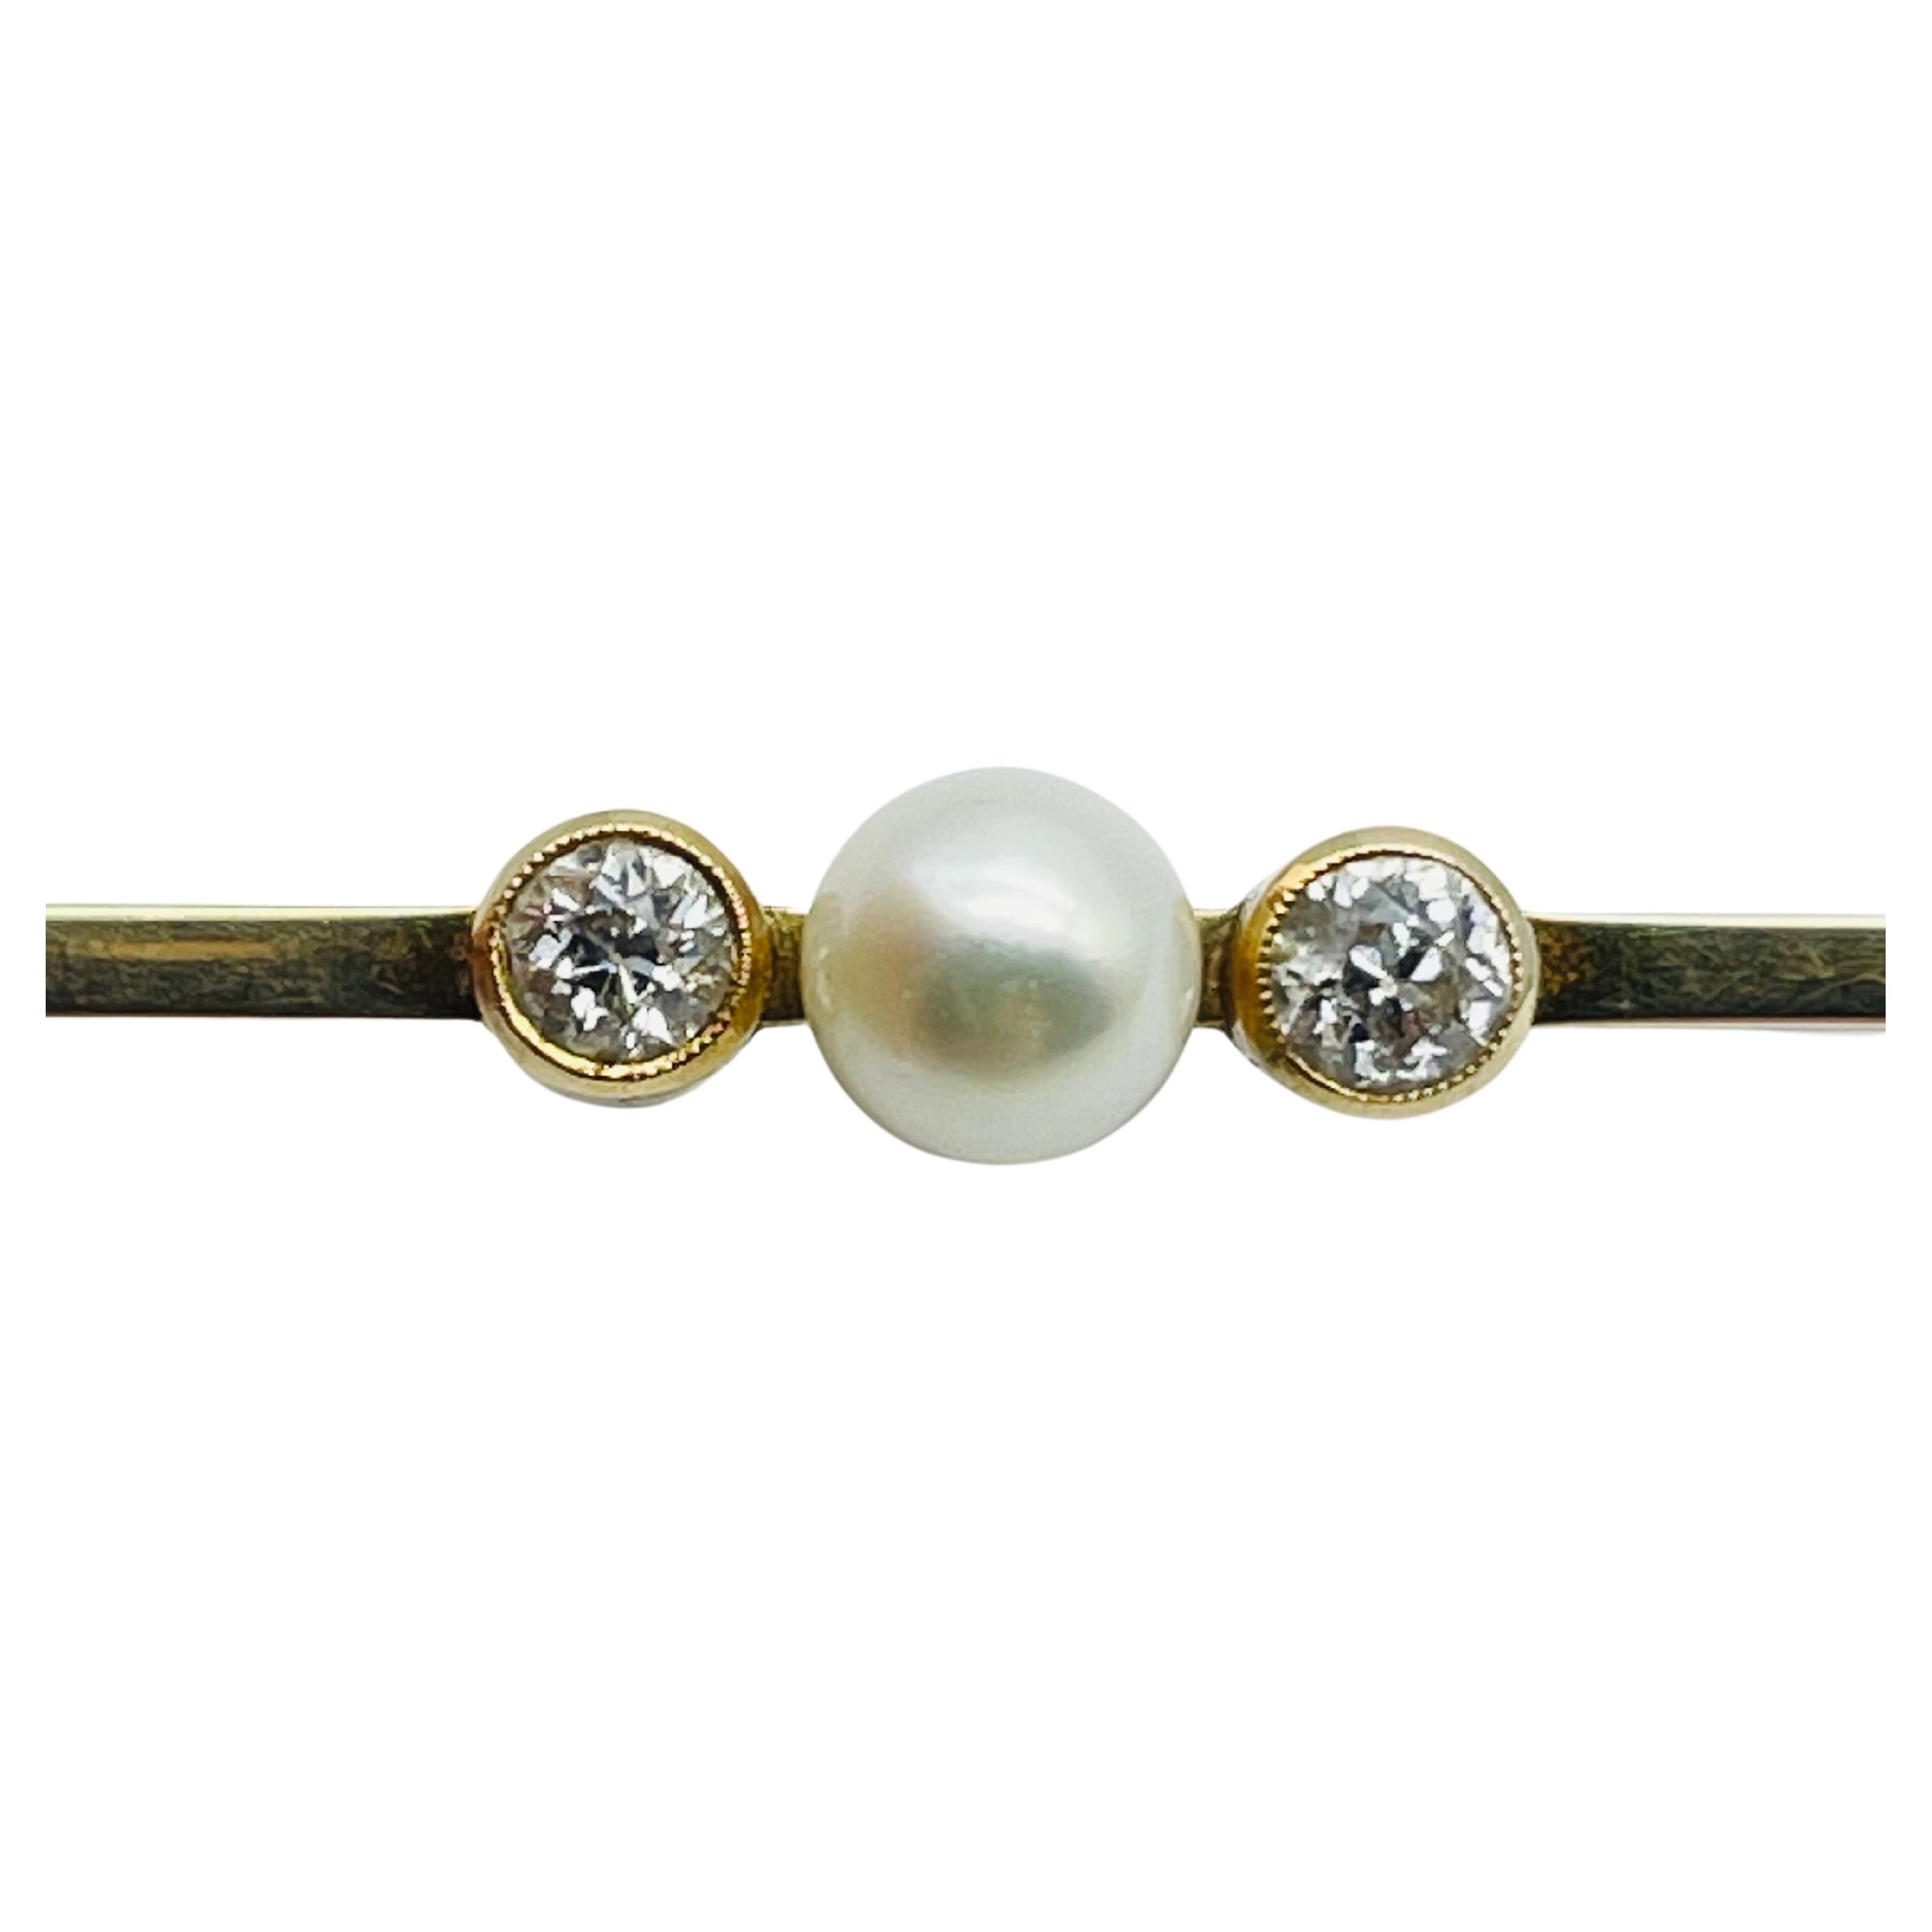 Antique 14k gold bar brooch with diamonds and pearl For Sale